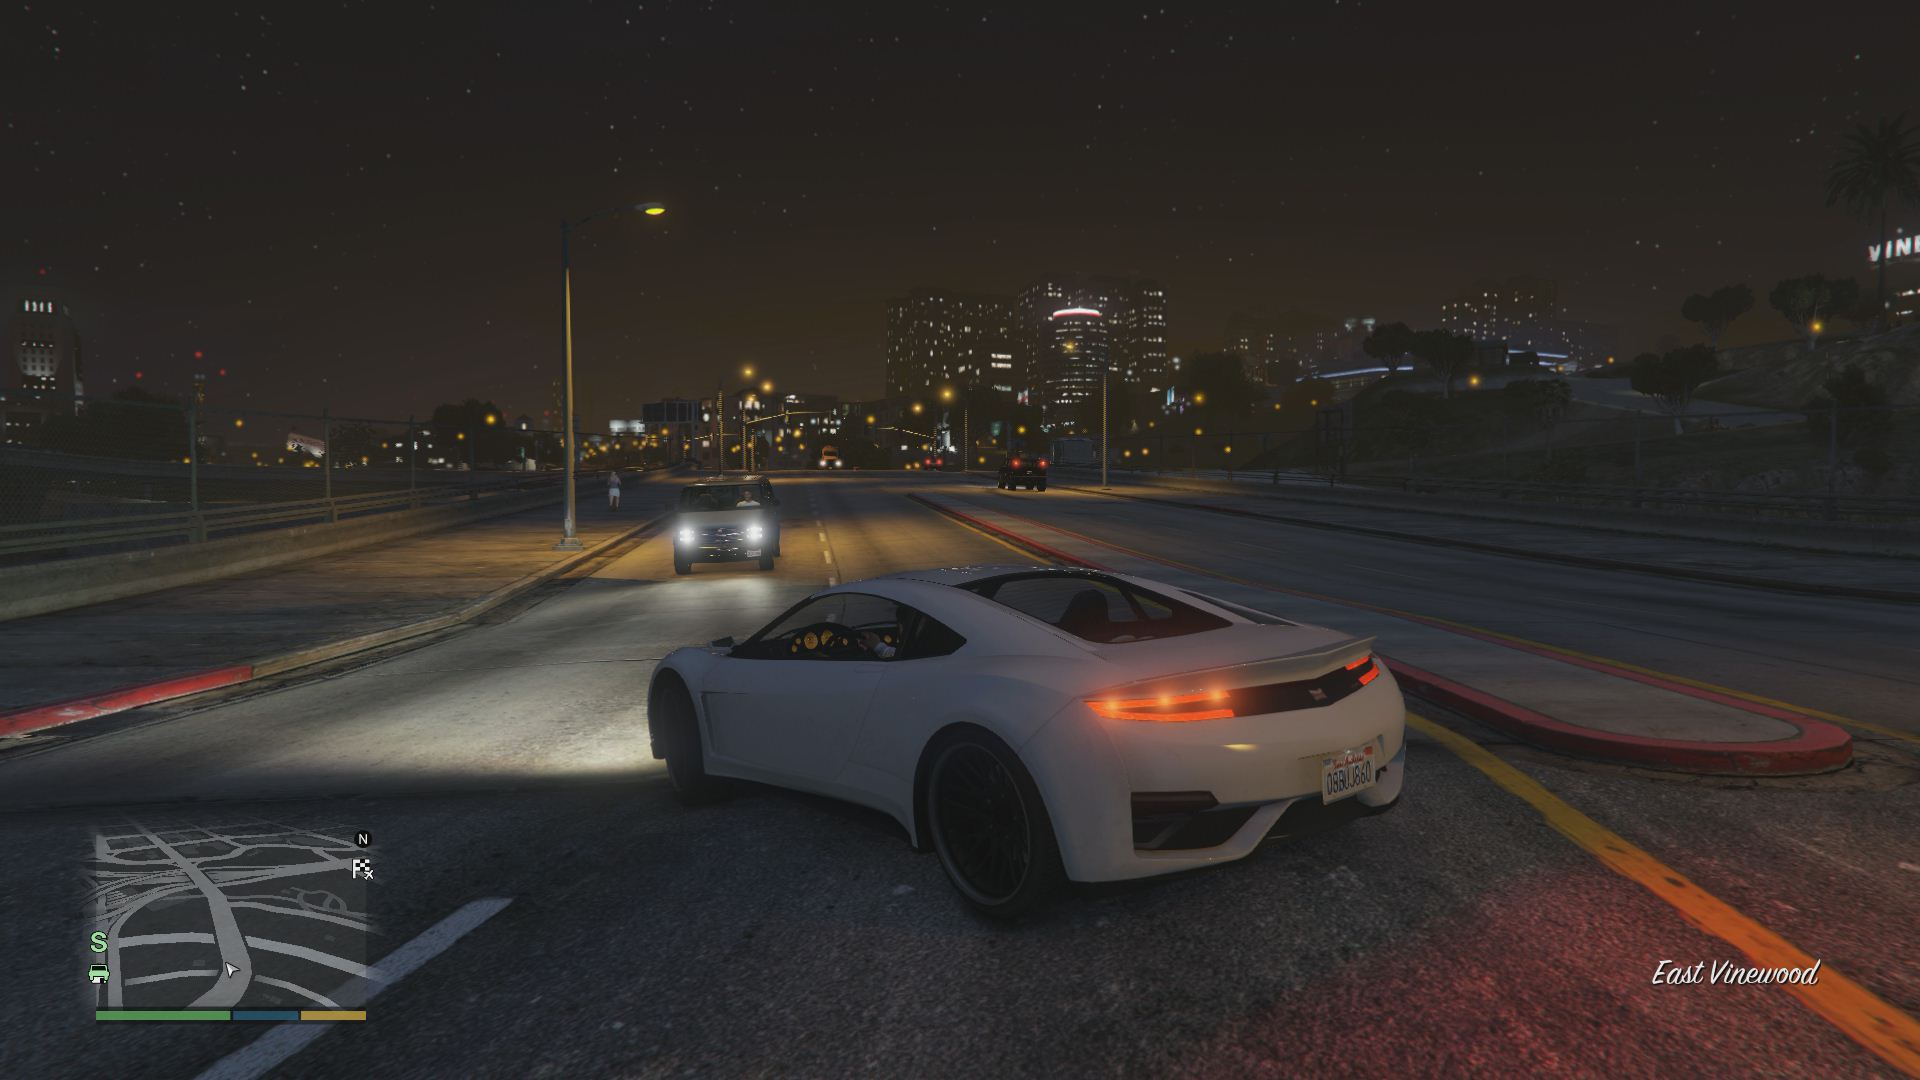 Grand Theft Auto 5 First Xbox One Screenshots Leaked Looks Beautiful